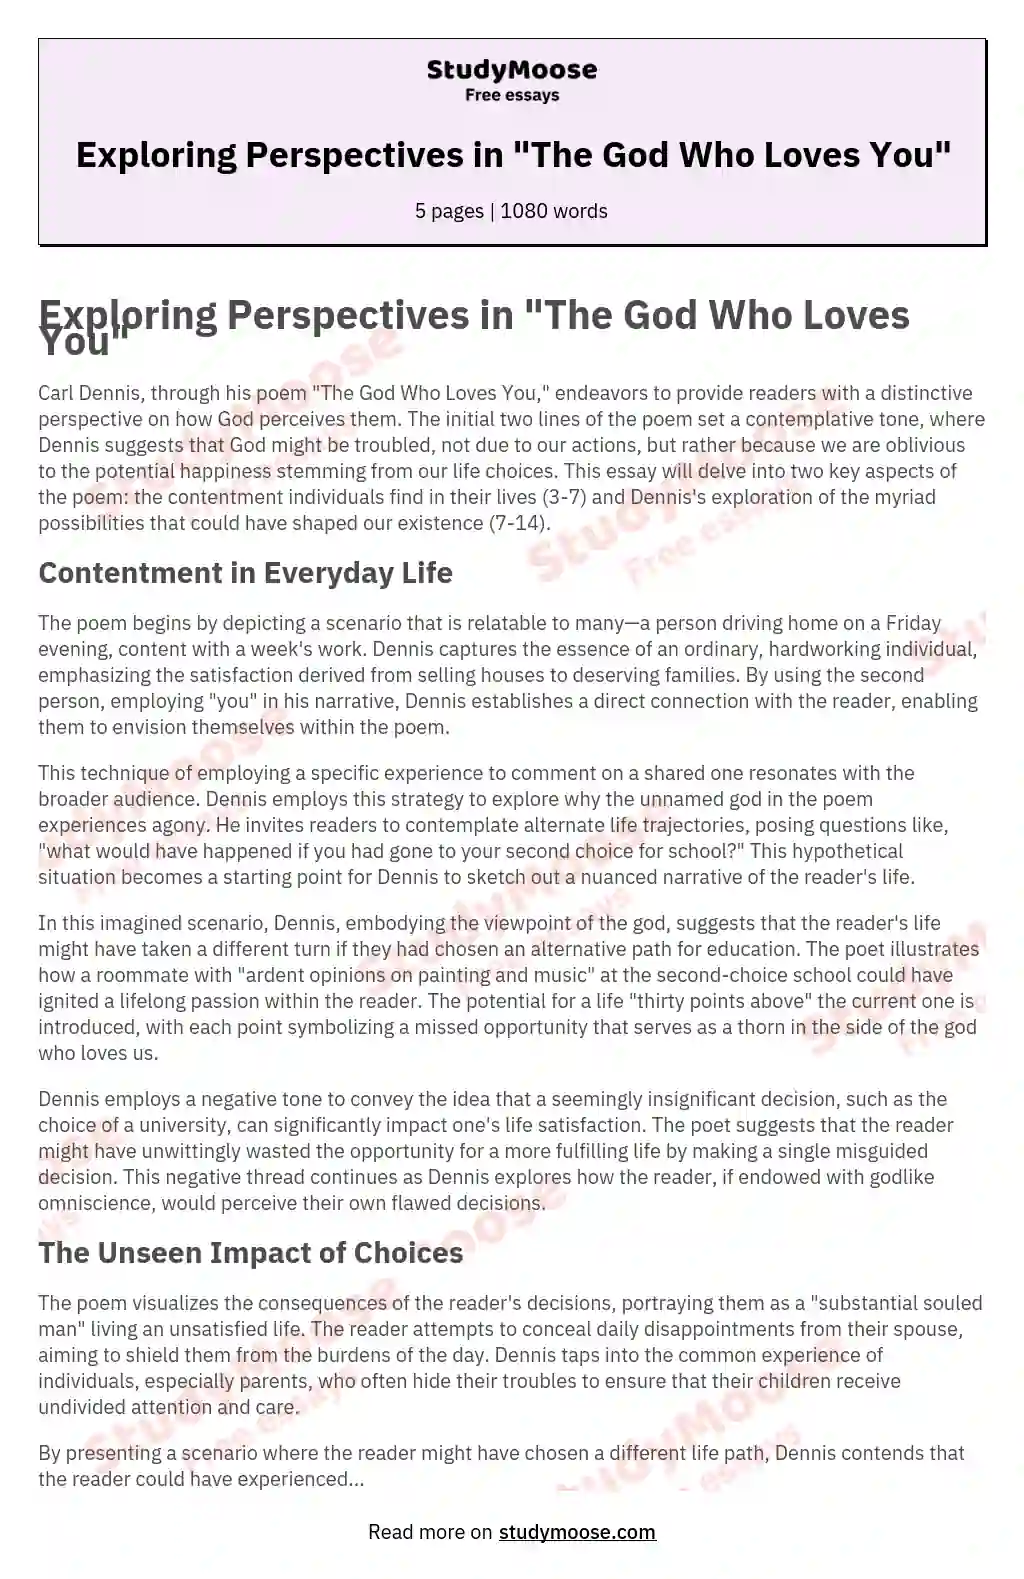 Exploring Perspectives in "The God Who Loves You" essay